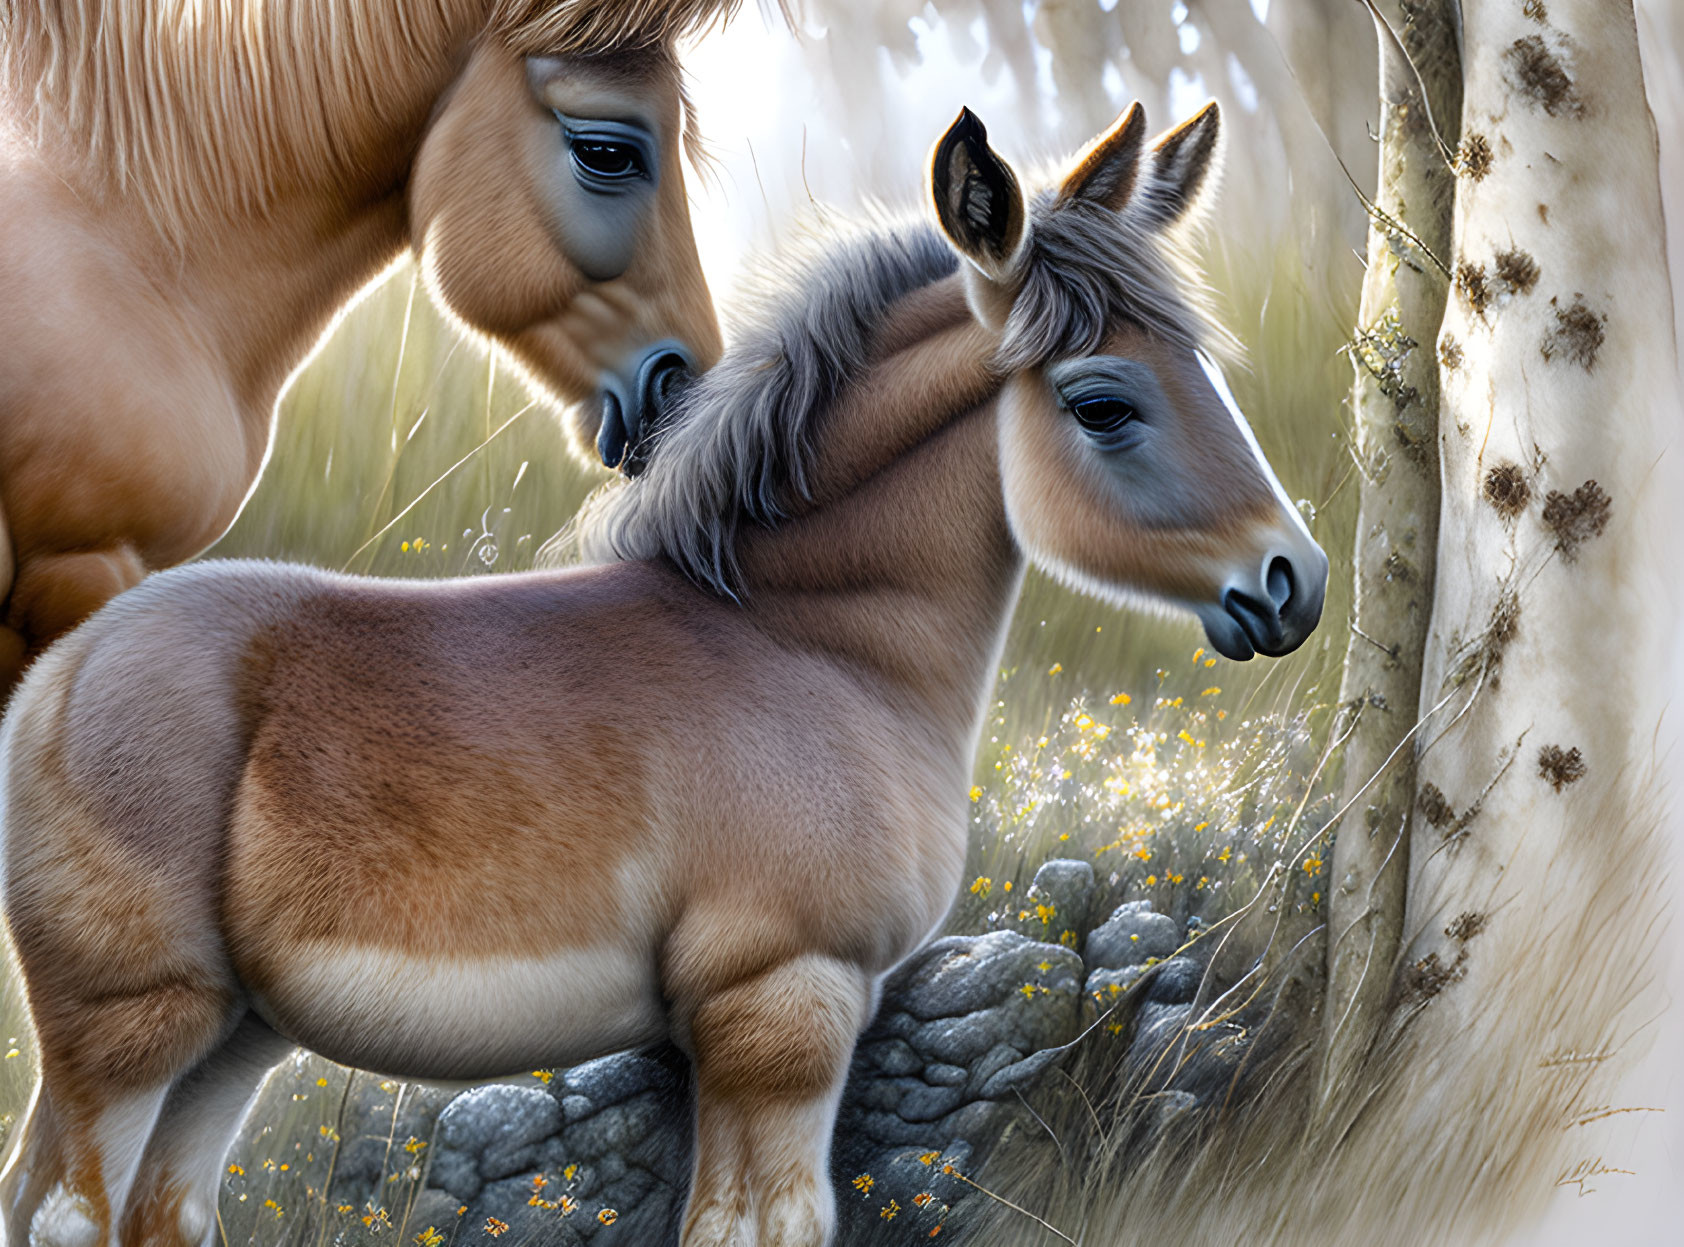 Realistic illustration of two horses in serene meadow with lush manes